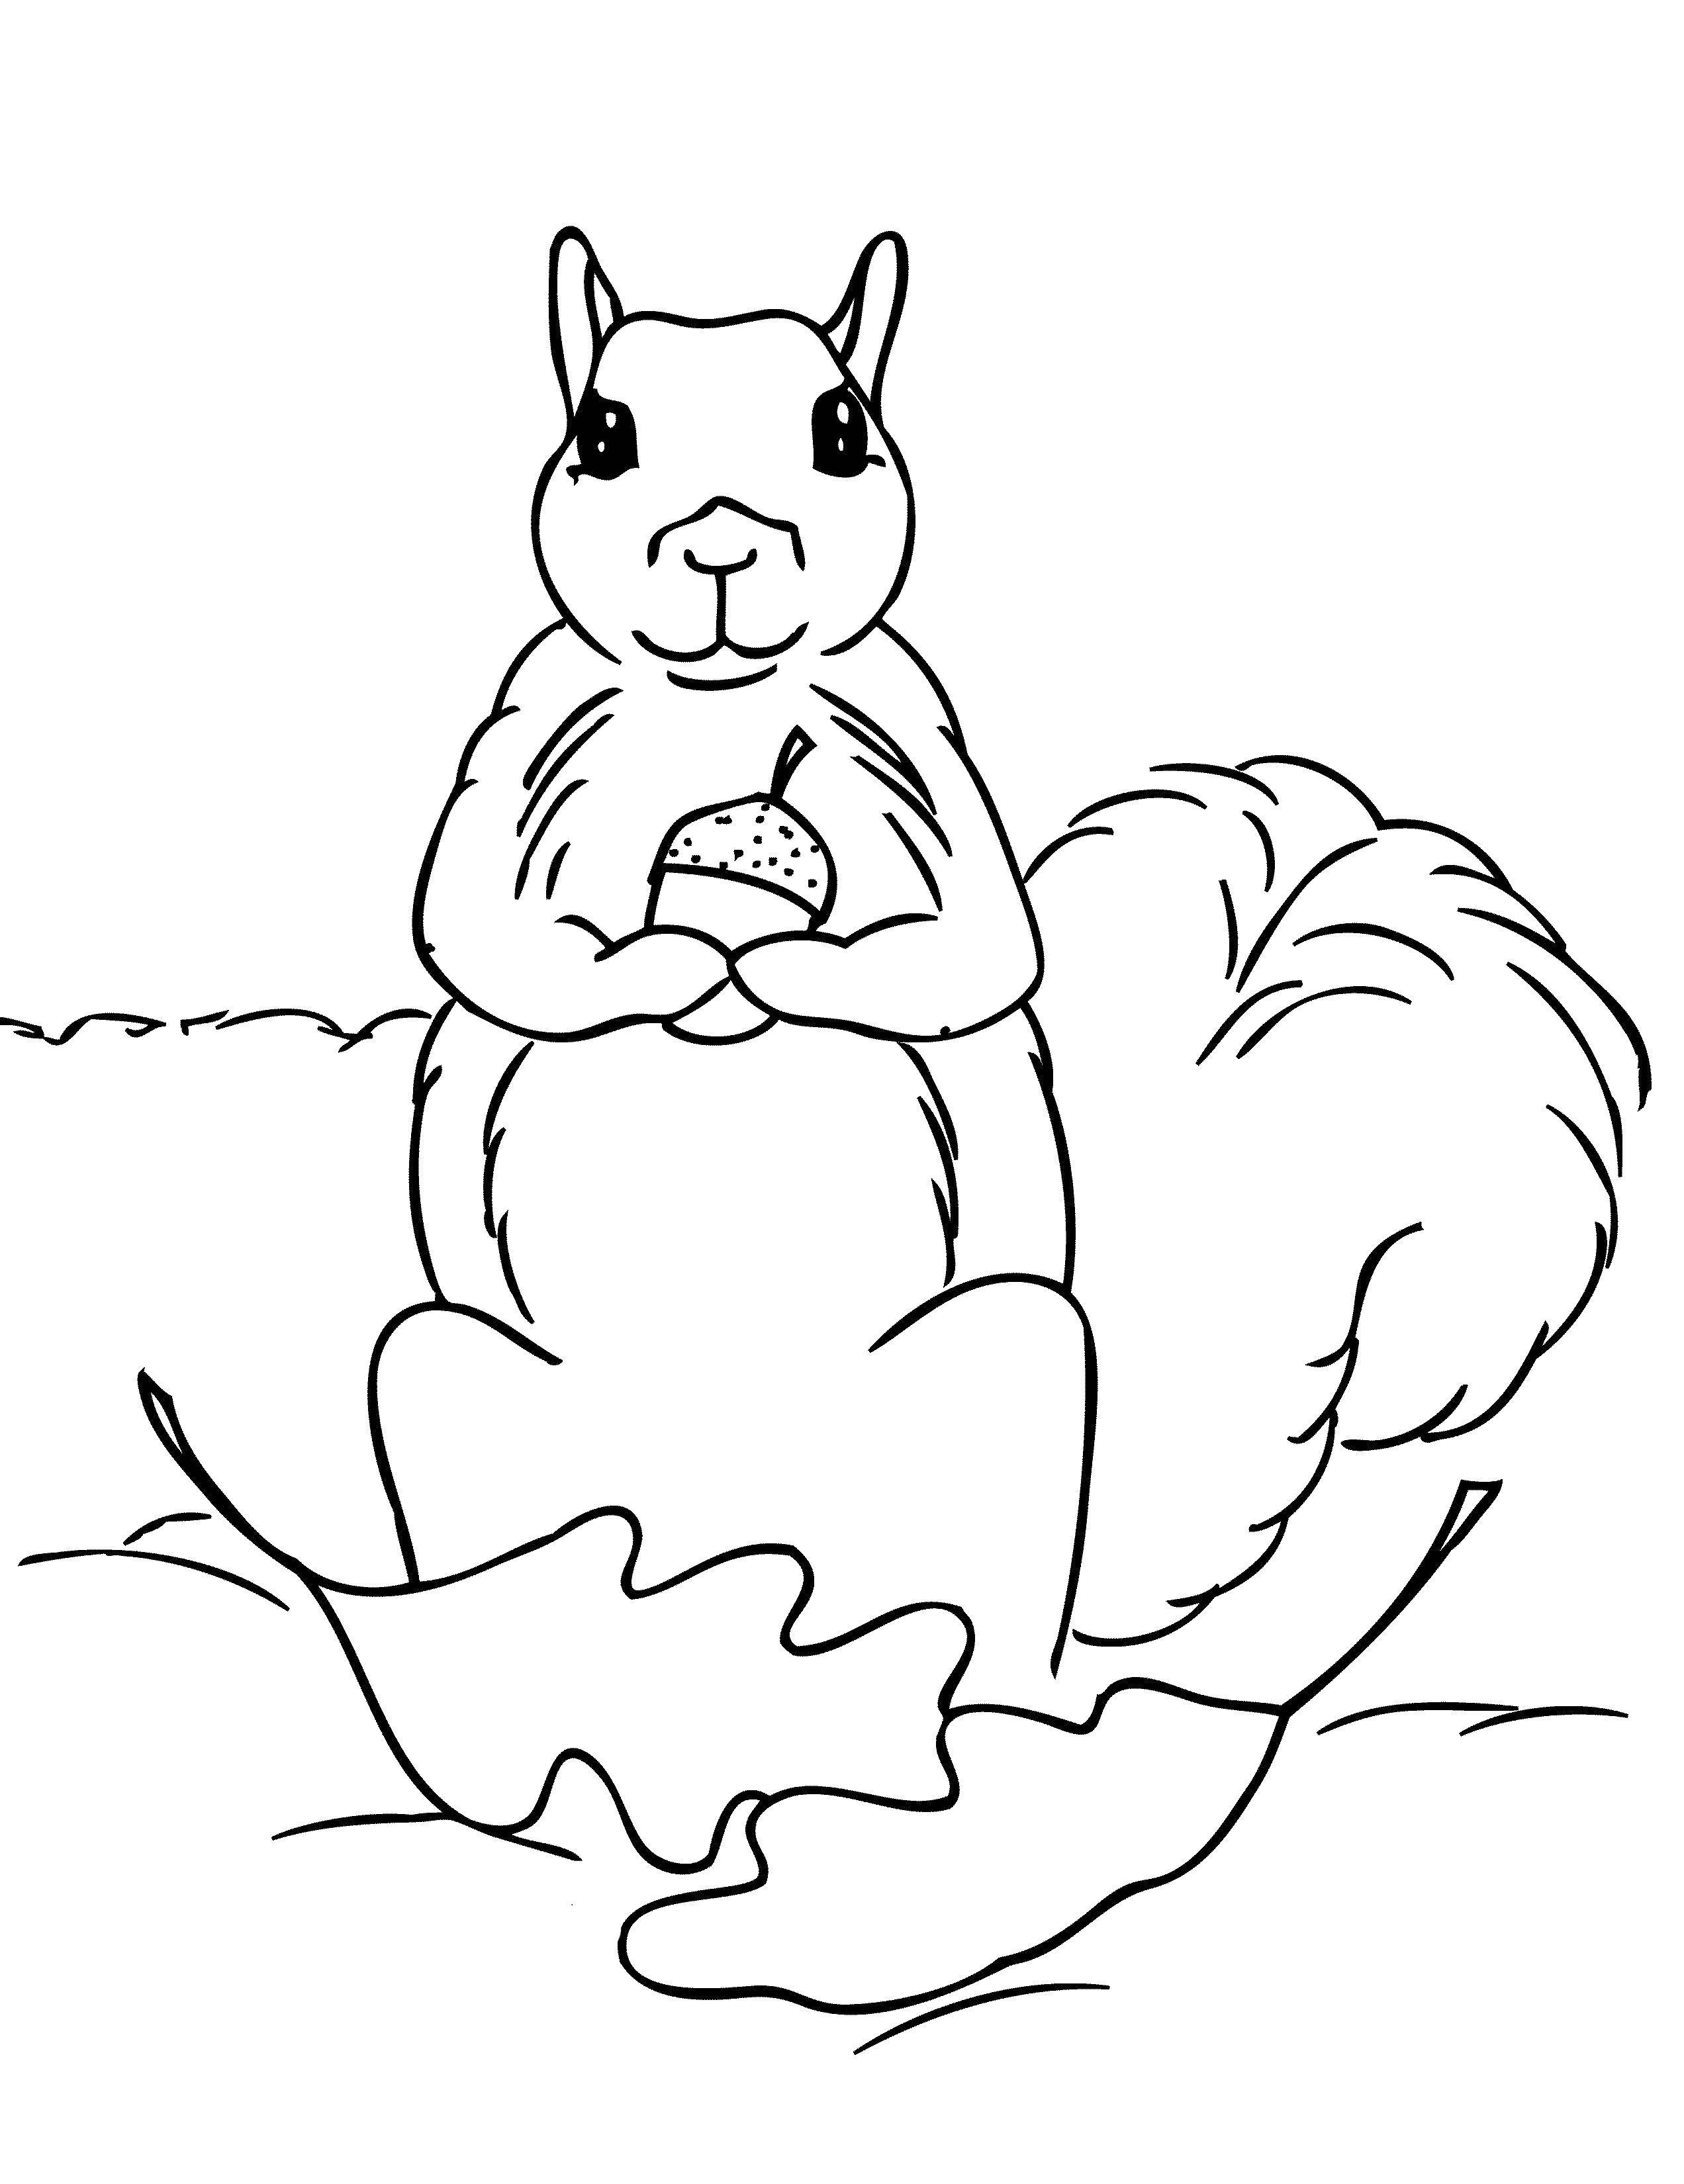 Online Coloring Pages Acorn Coloring Squirrel With Acorn Squirrel